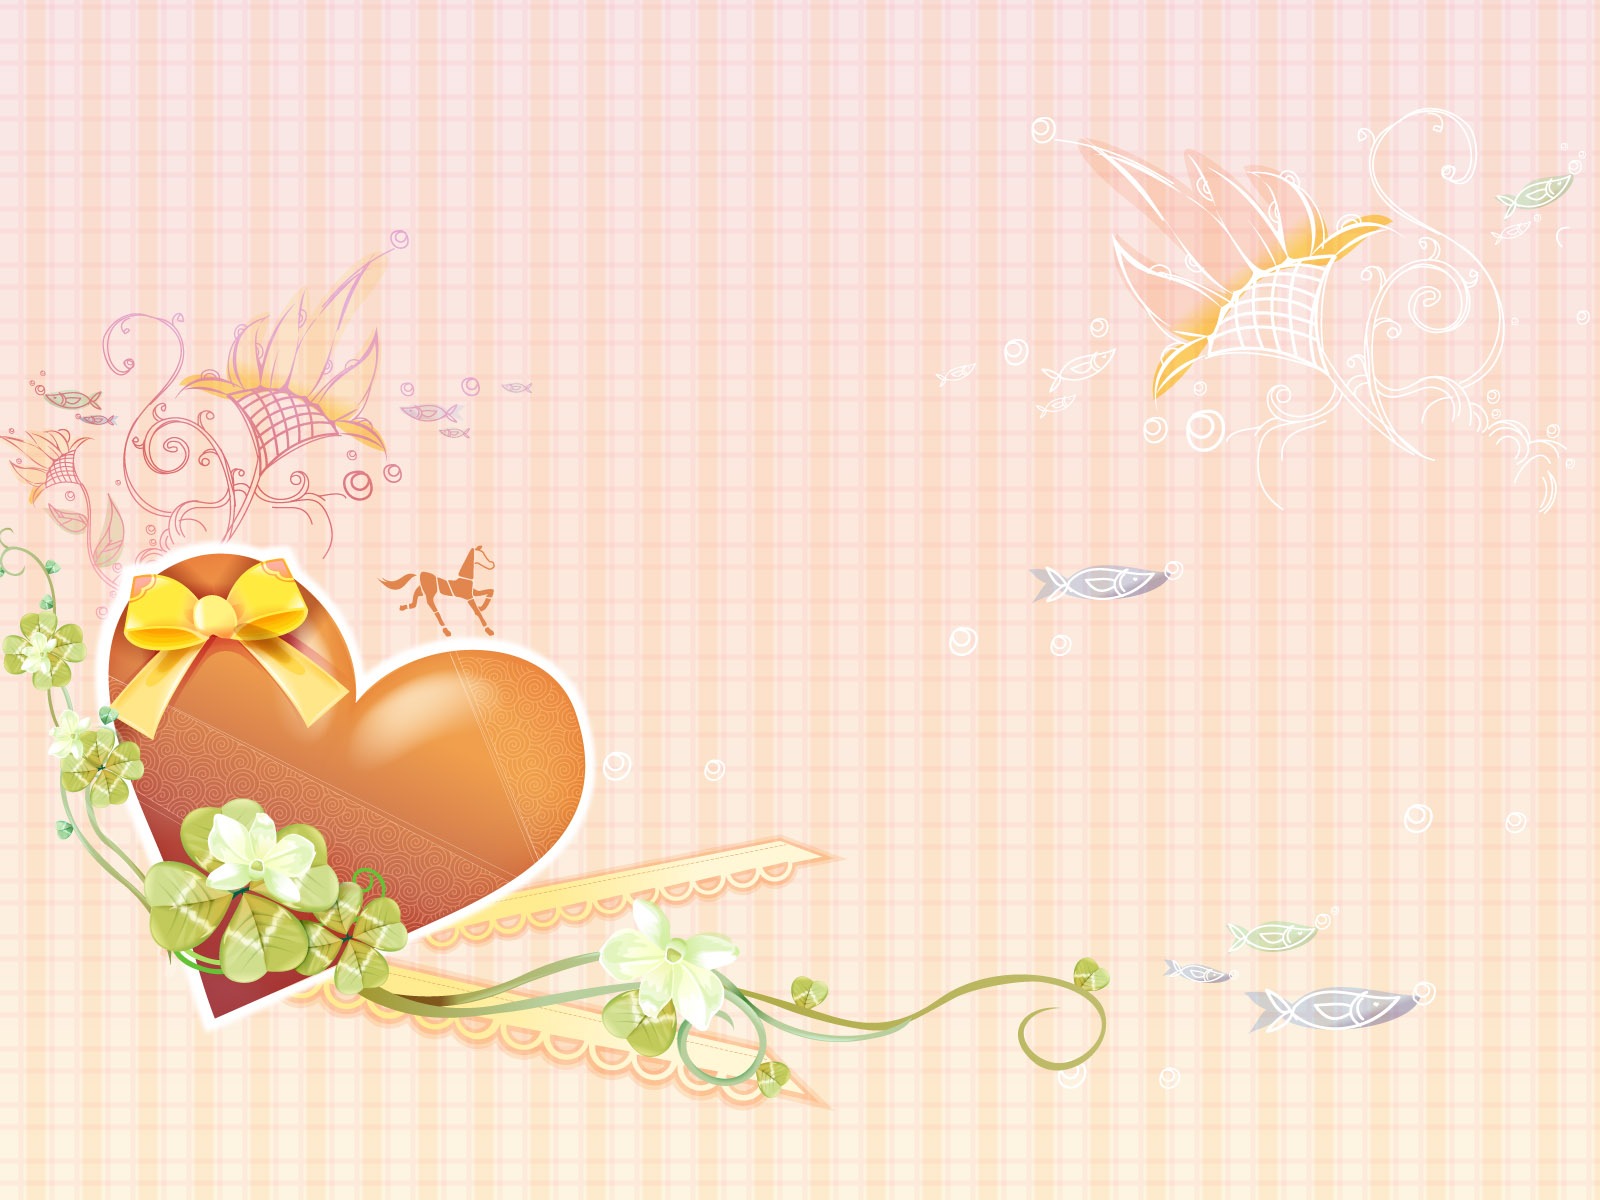 Valentine's Day Love Theme Wallpapers (3) #16 - 1600x1200